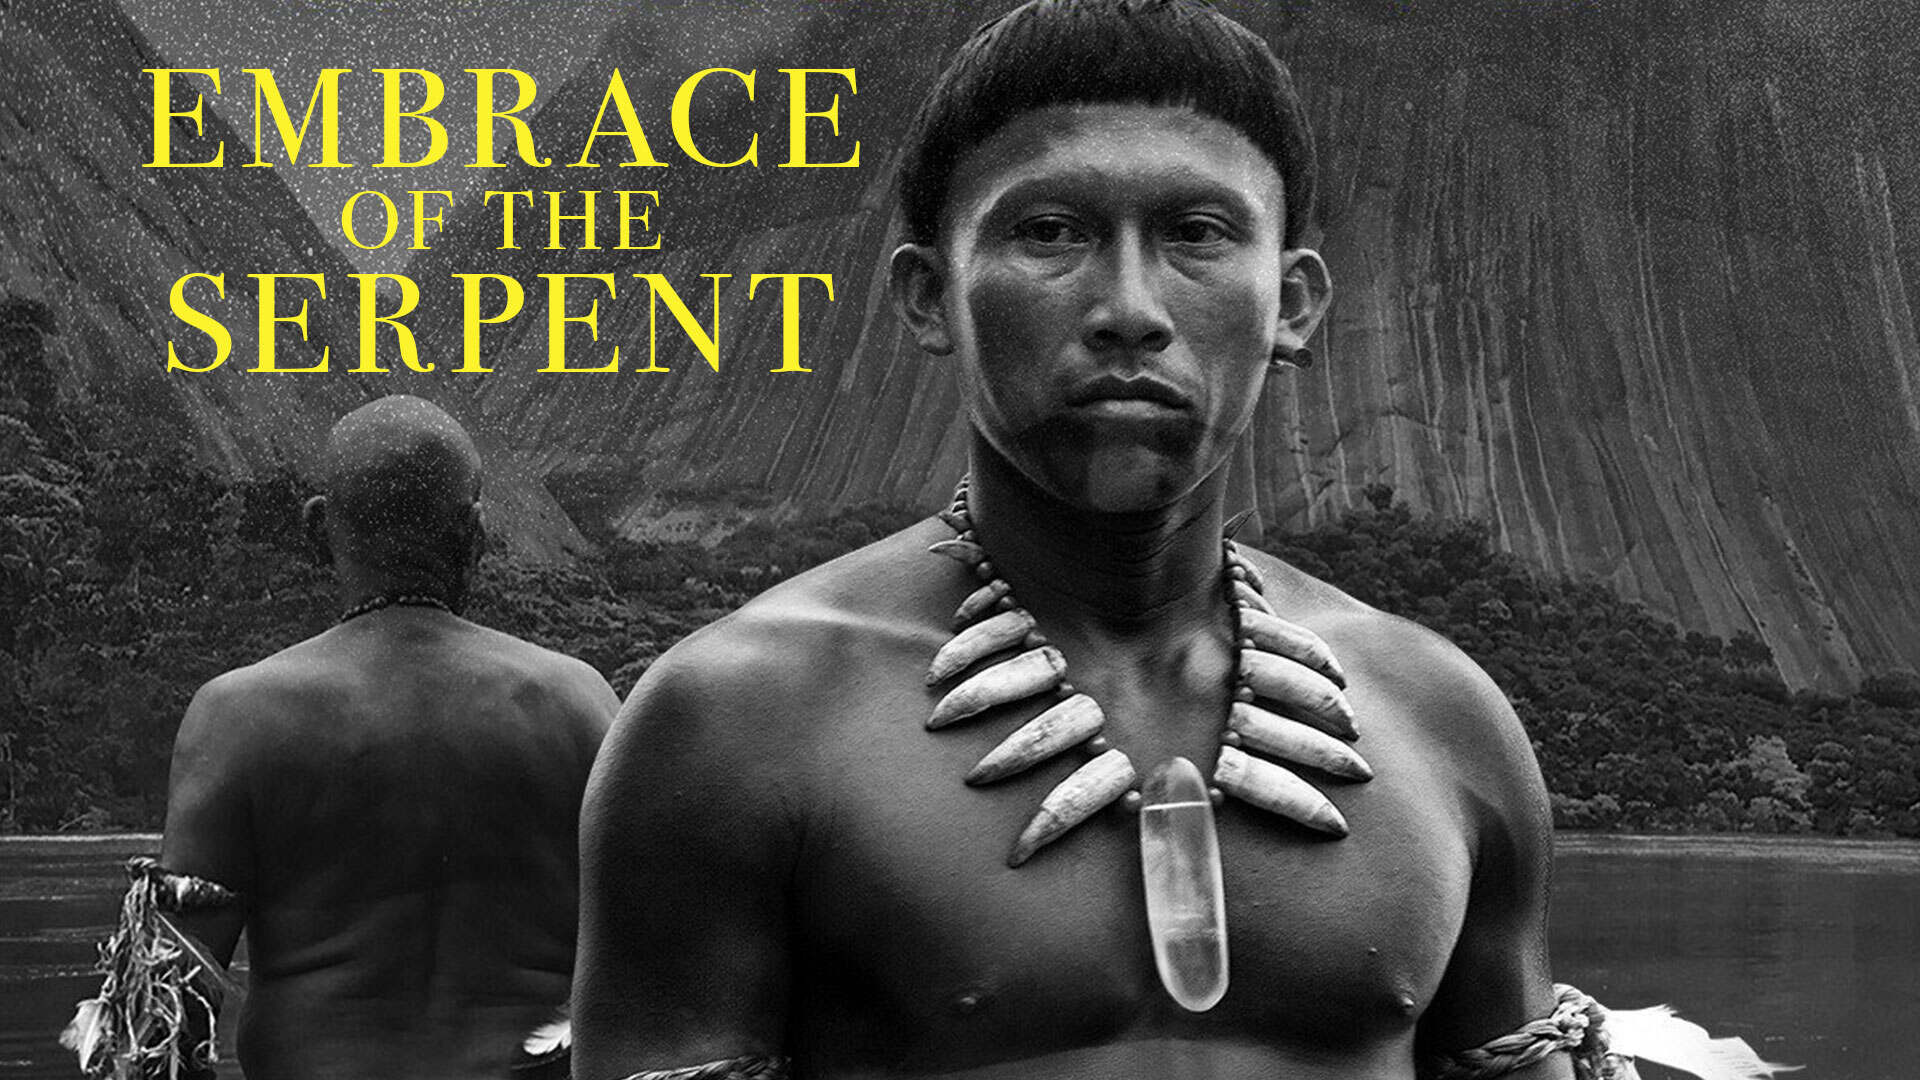 47-facts-about-the-movie-embrace-of-the-serpent